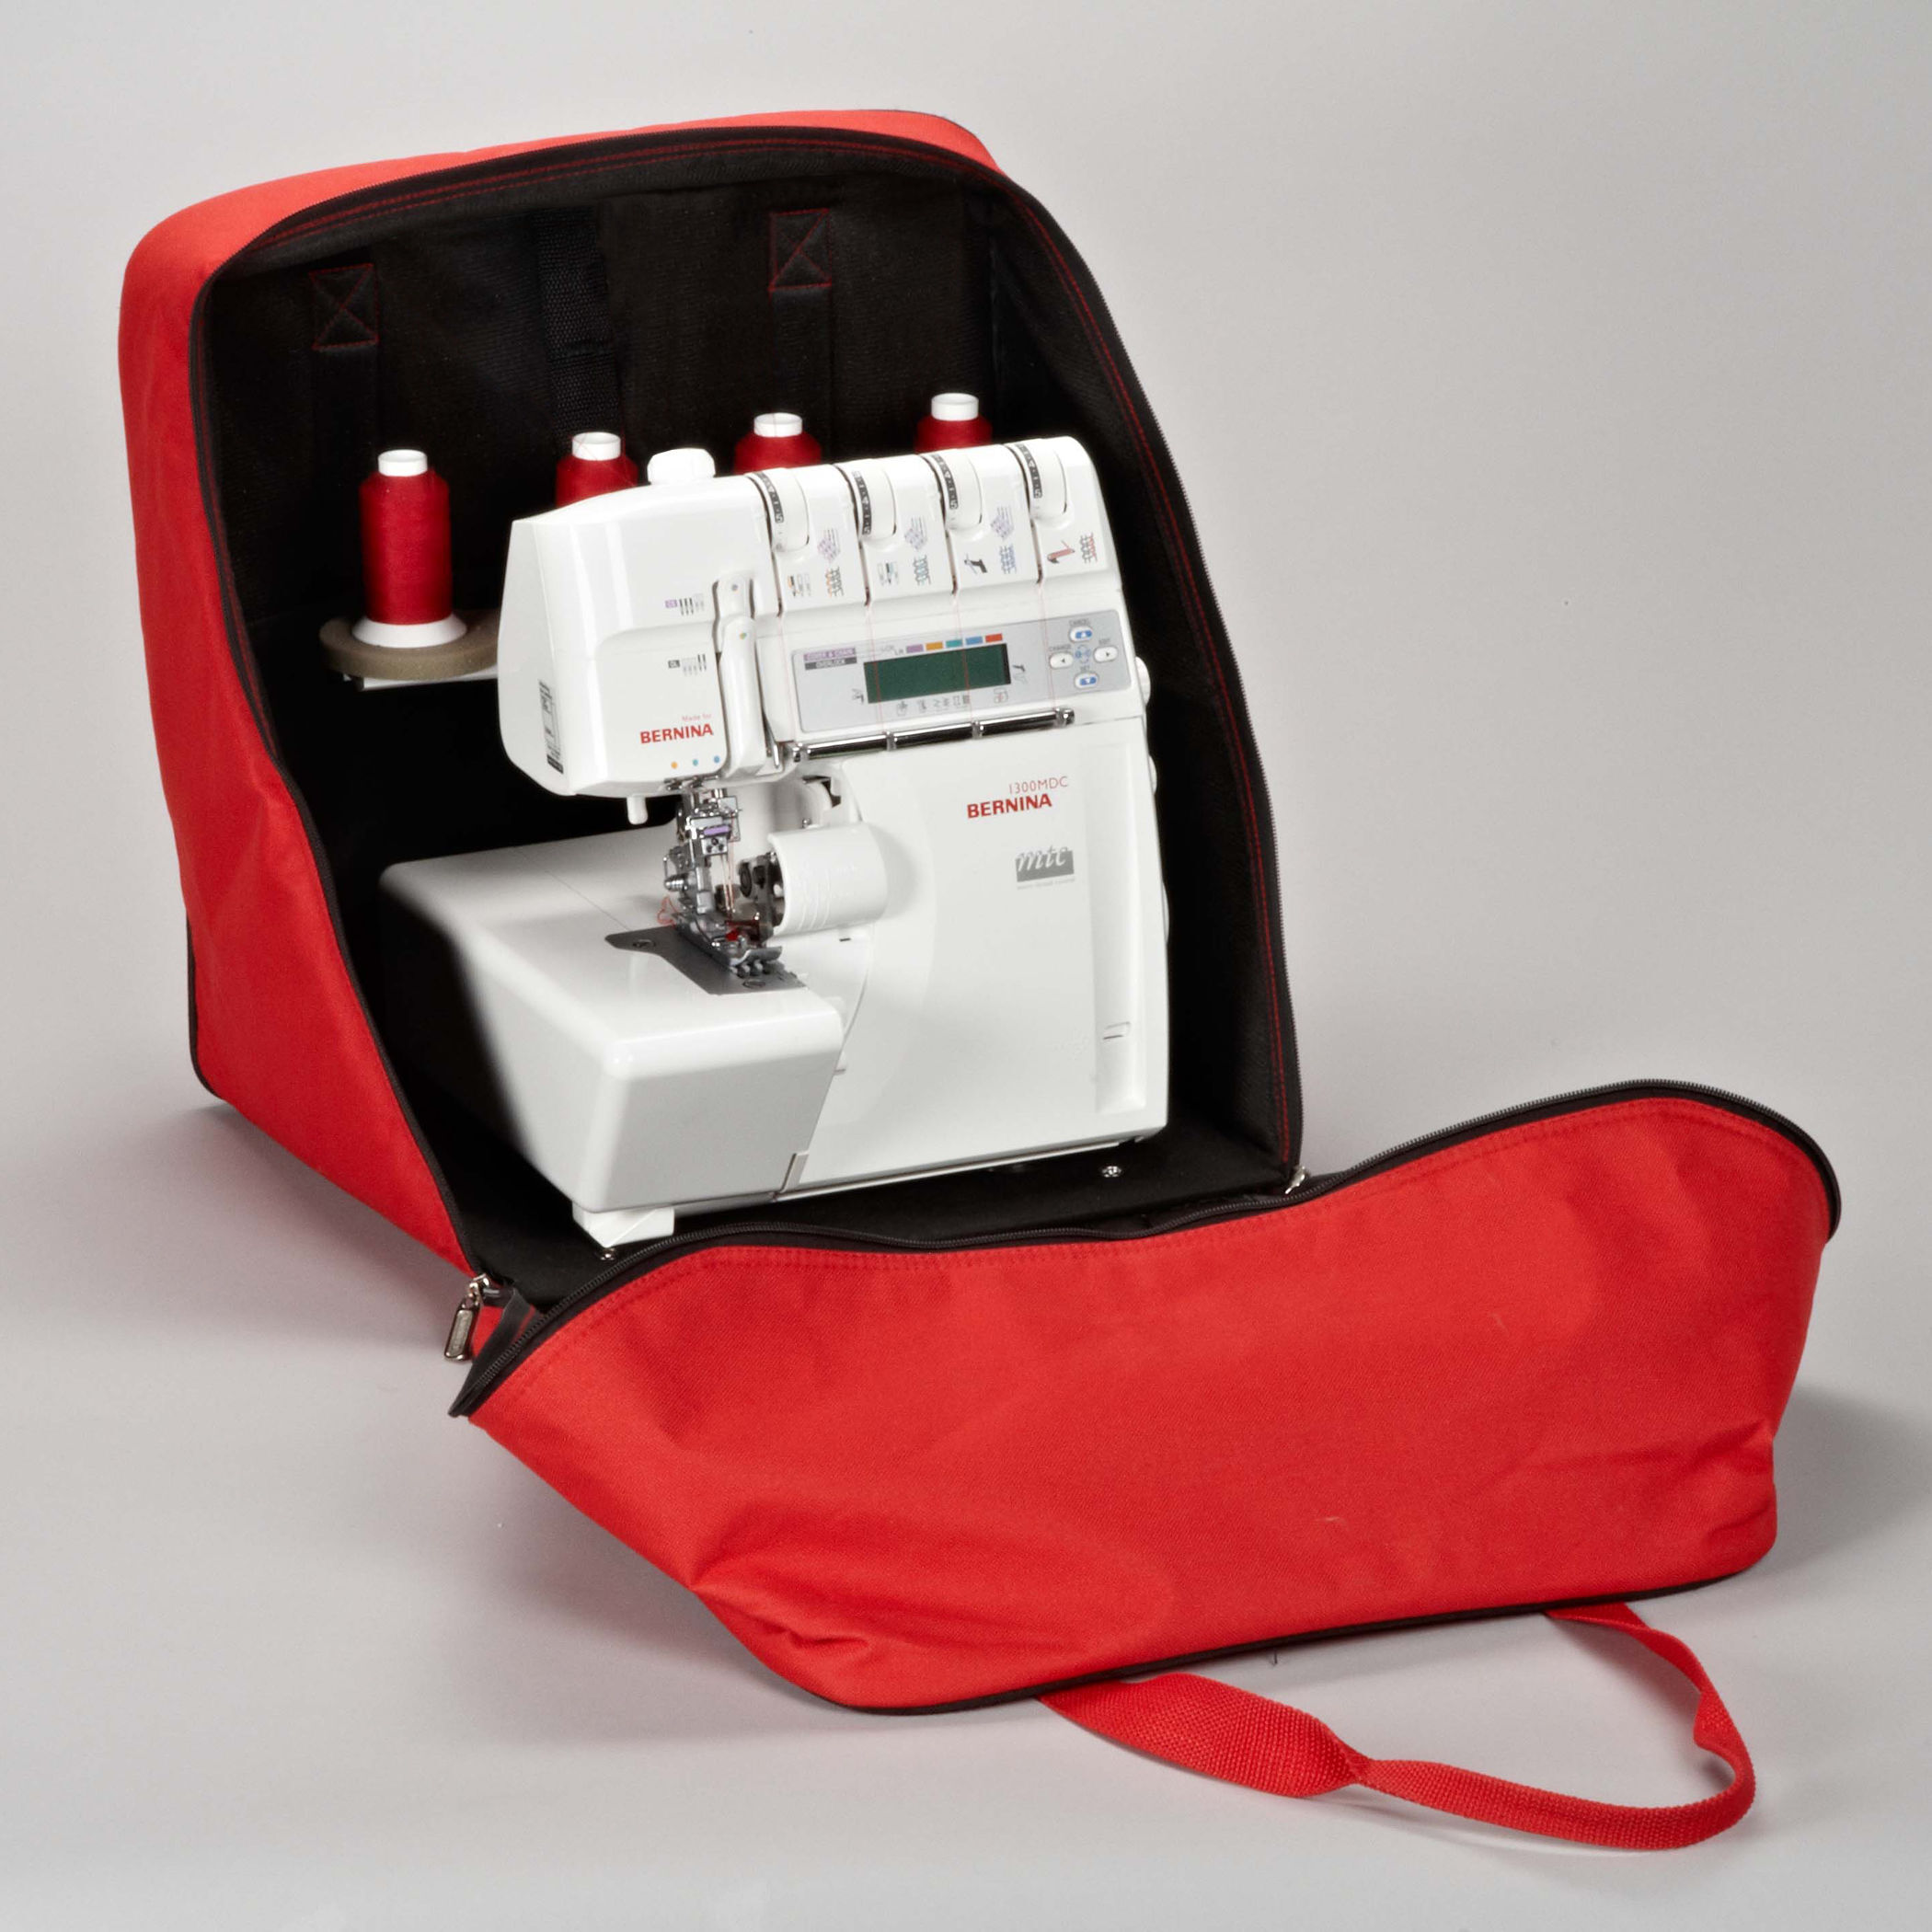 Carrying Case for Overlockers/Sergers: for your when traveling